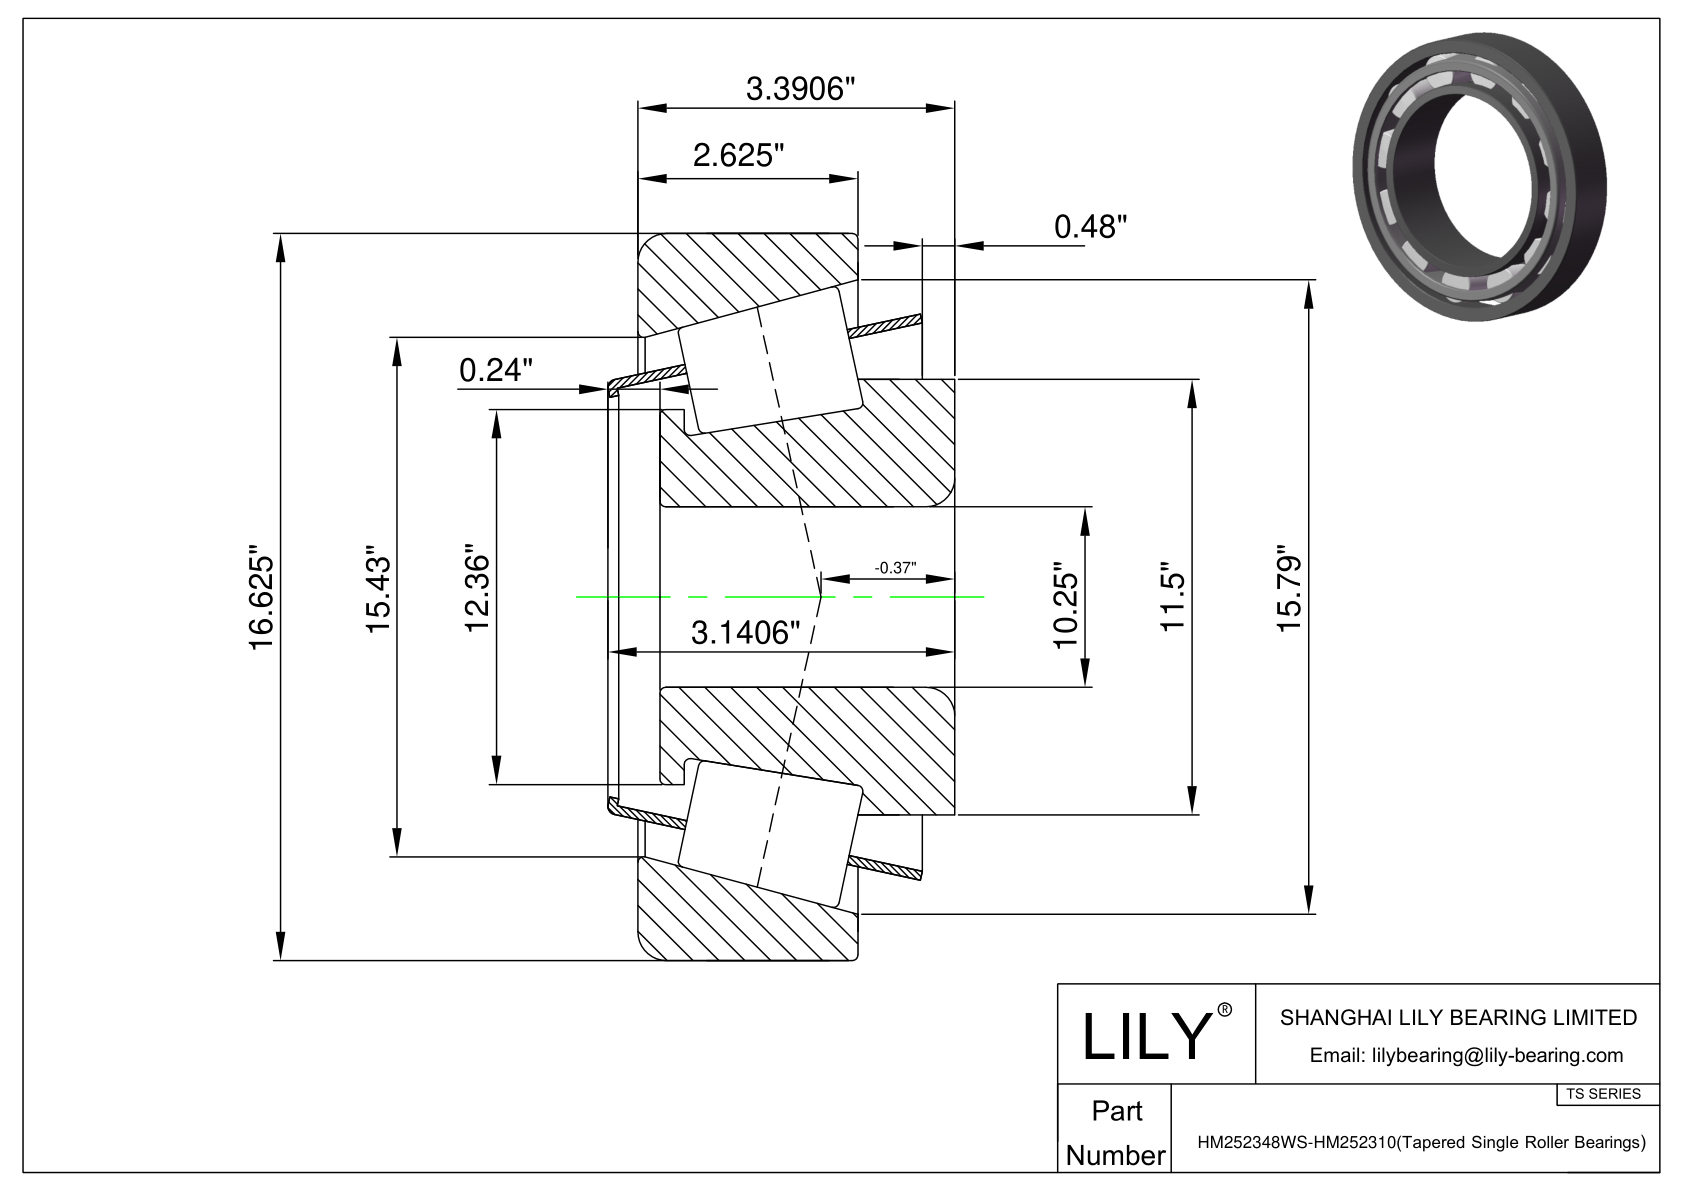 HM252348WS-HM252310 TS (Tapered Single Roller Bearings) (Imperial) cad drawing